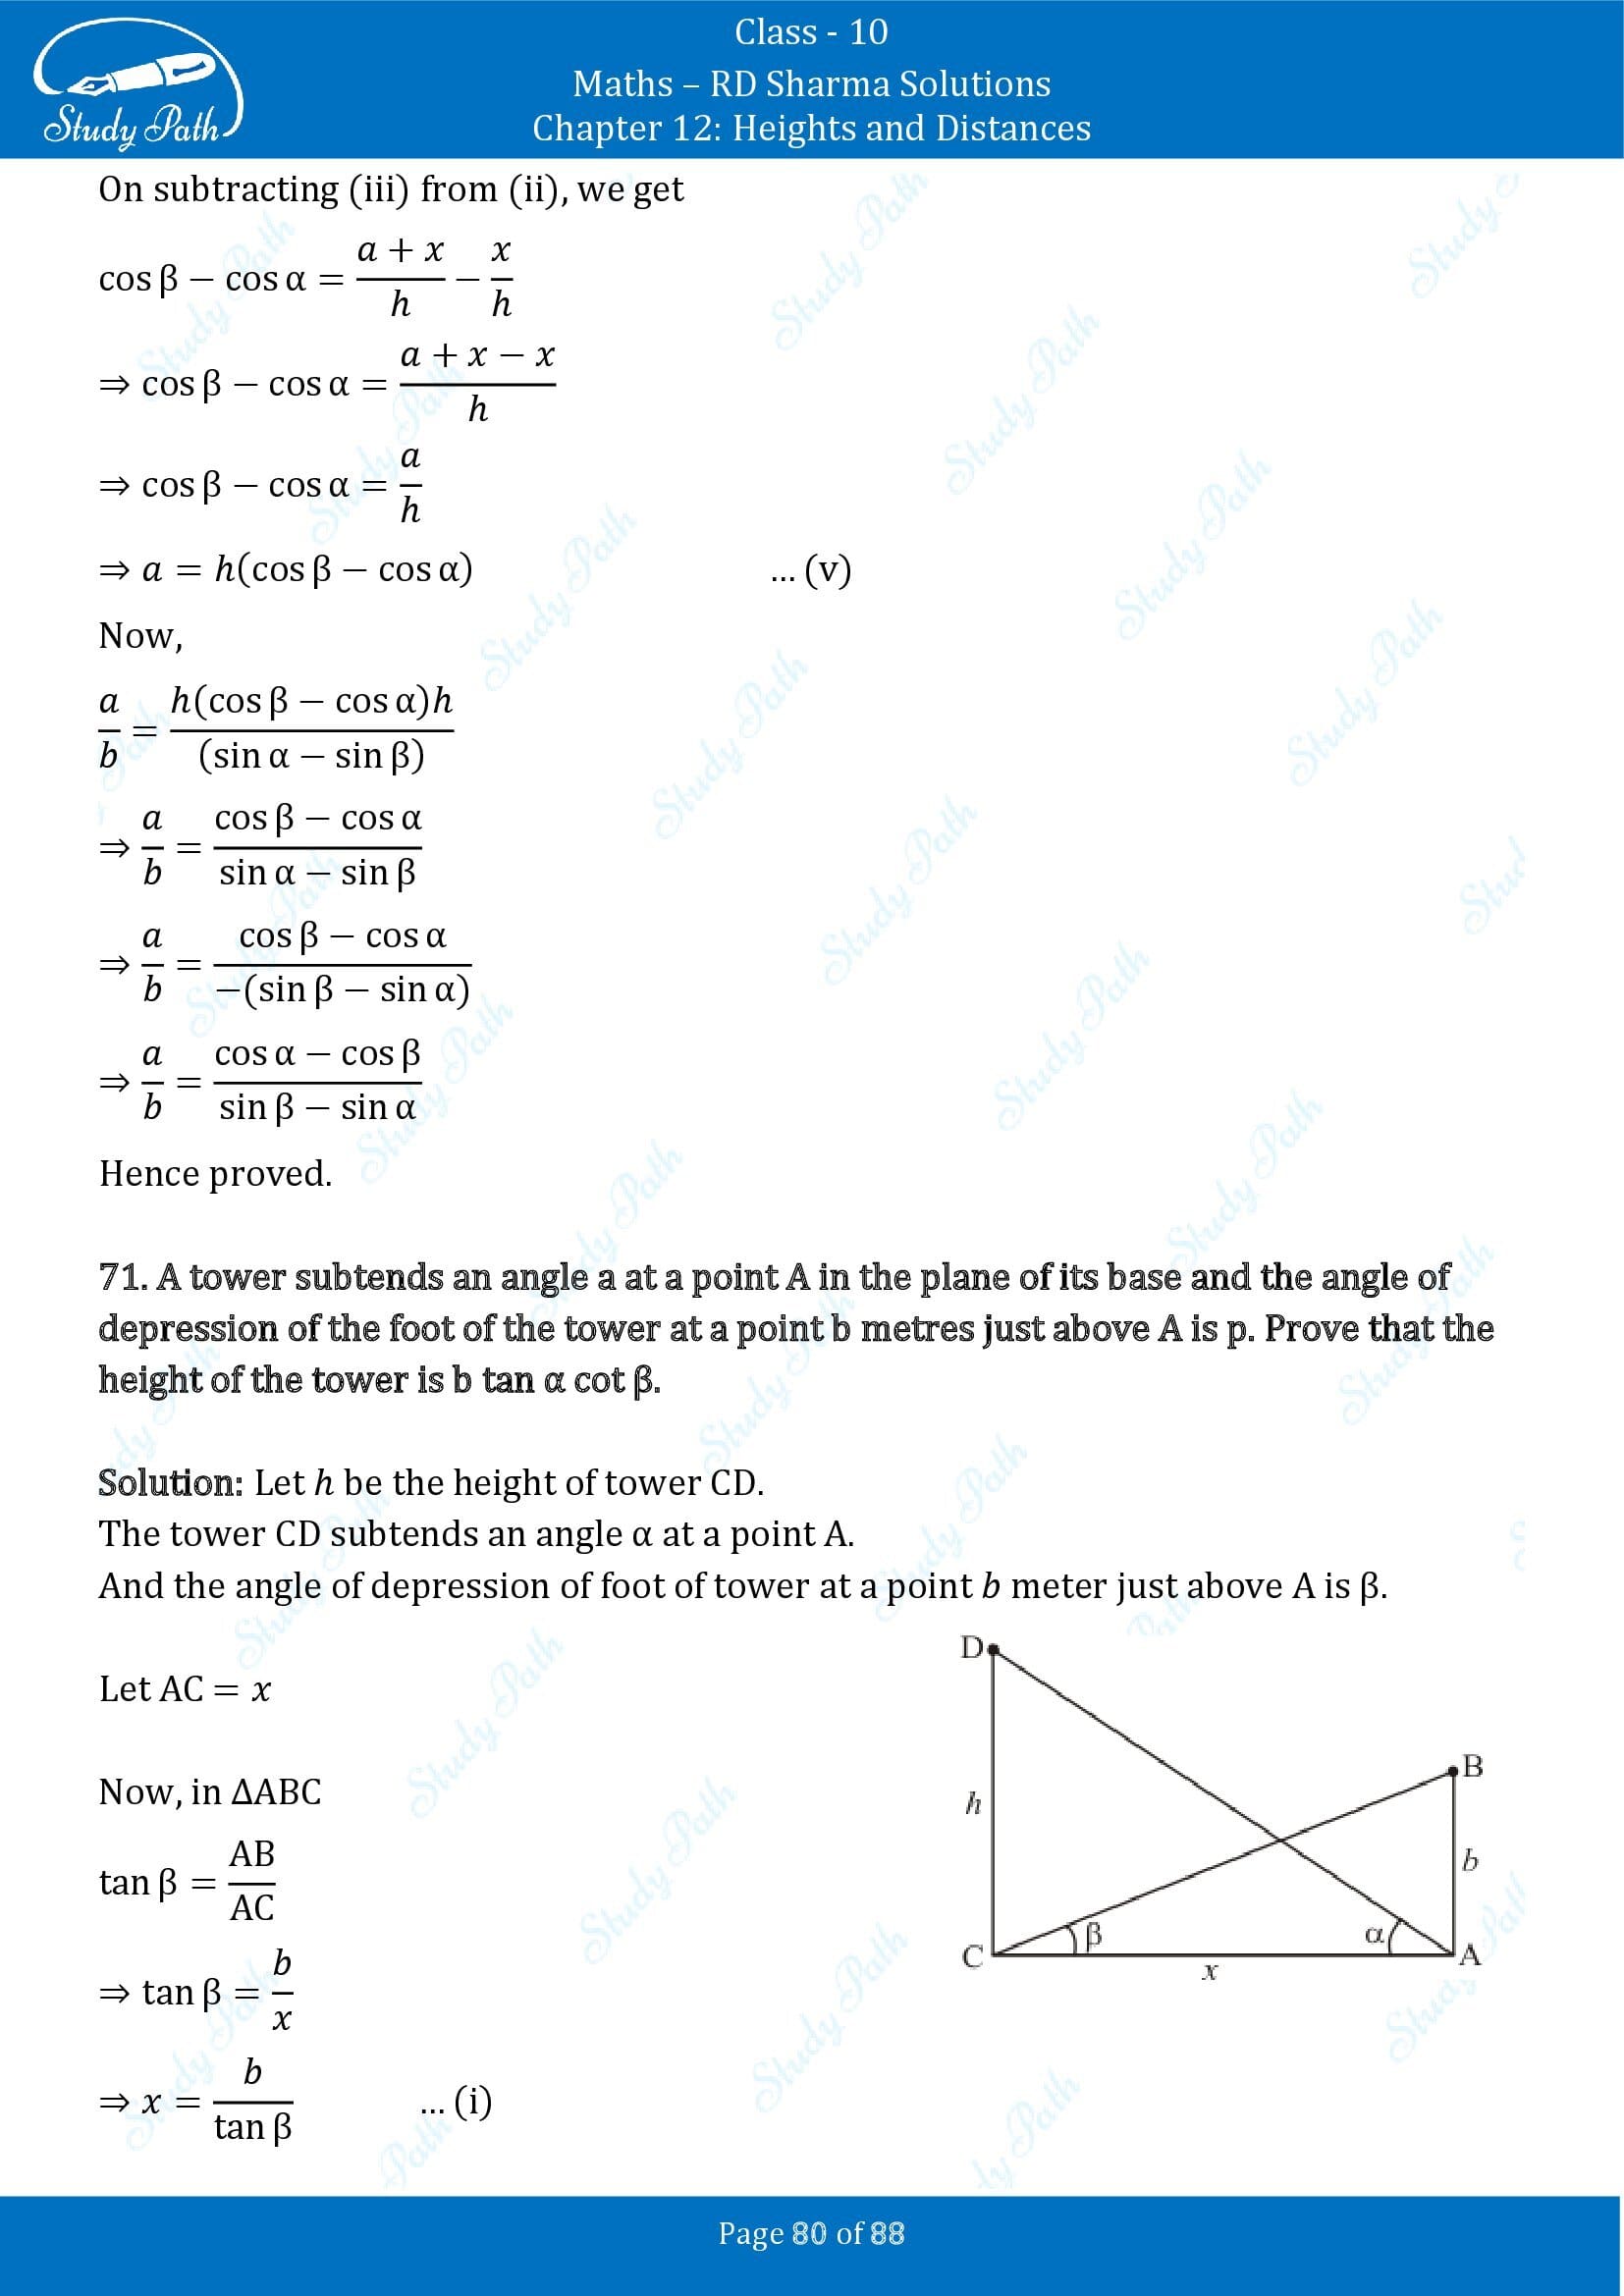 RD Sharma Solutions Class 10 Chapter 12 Heights and Distances Exercise 12.1 00080